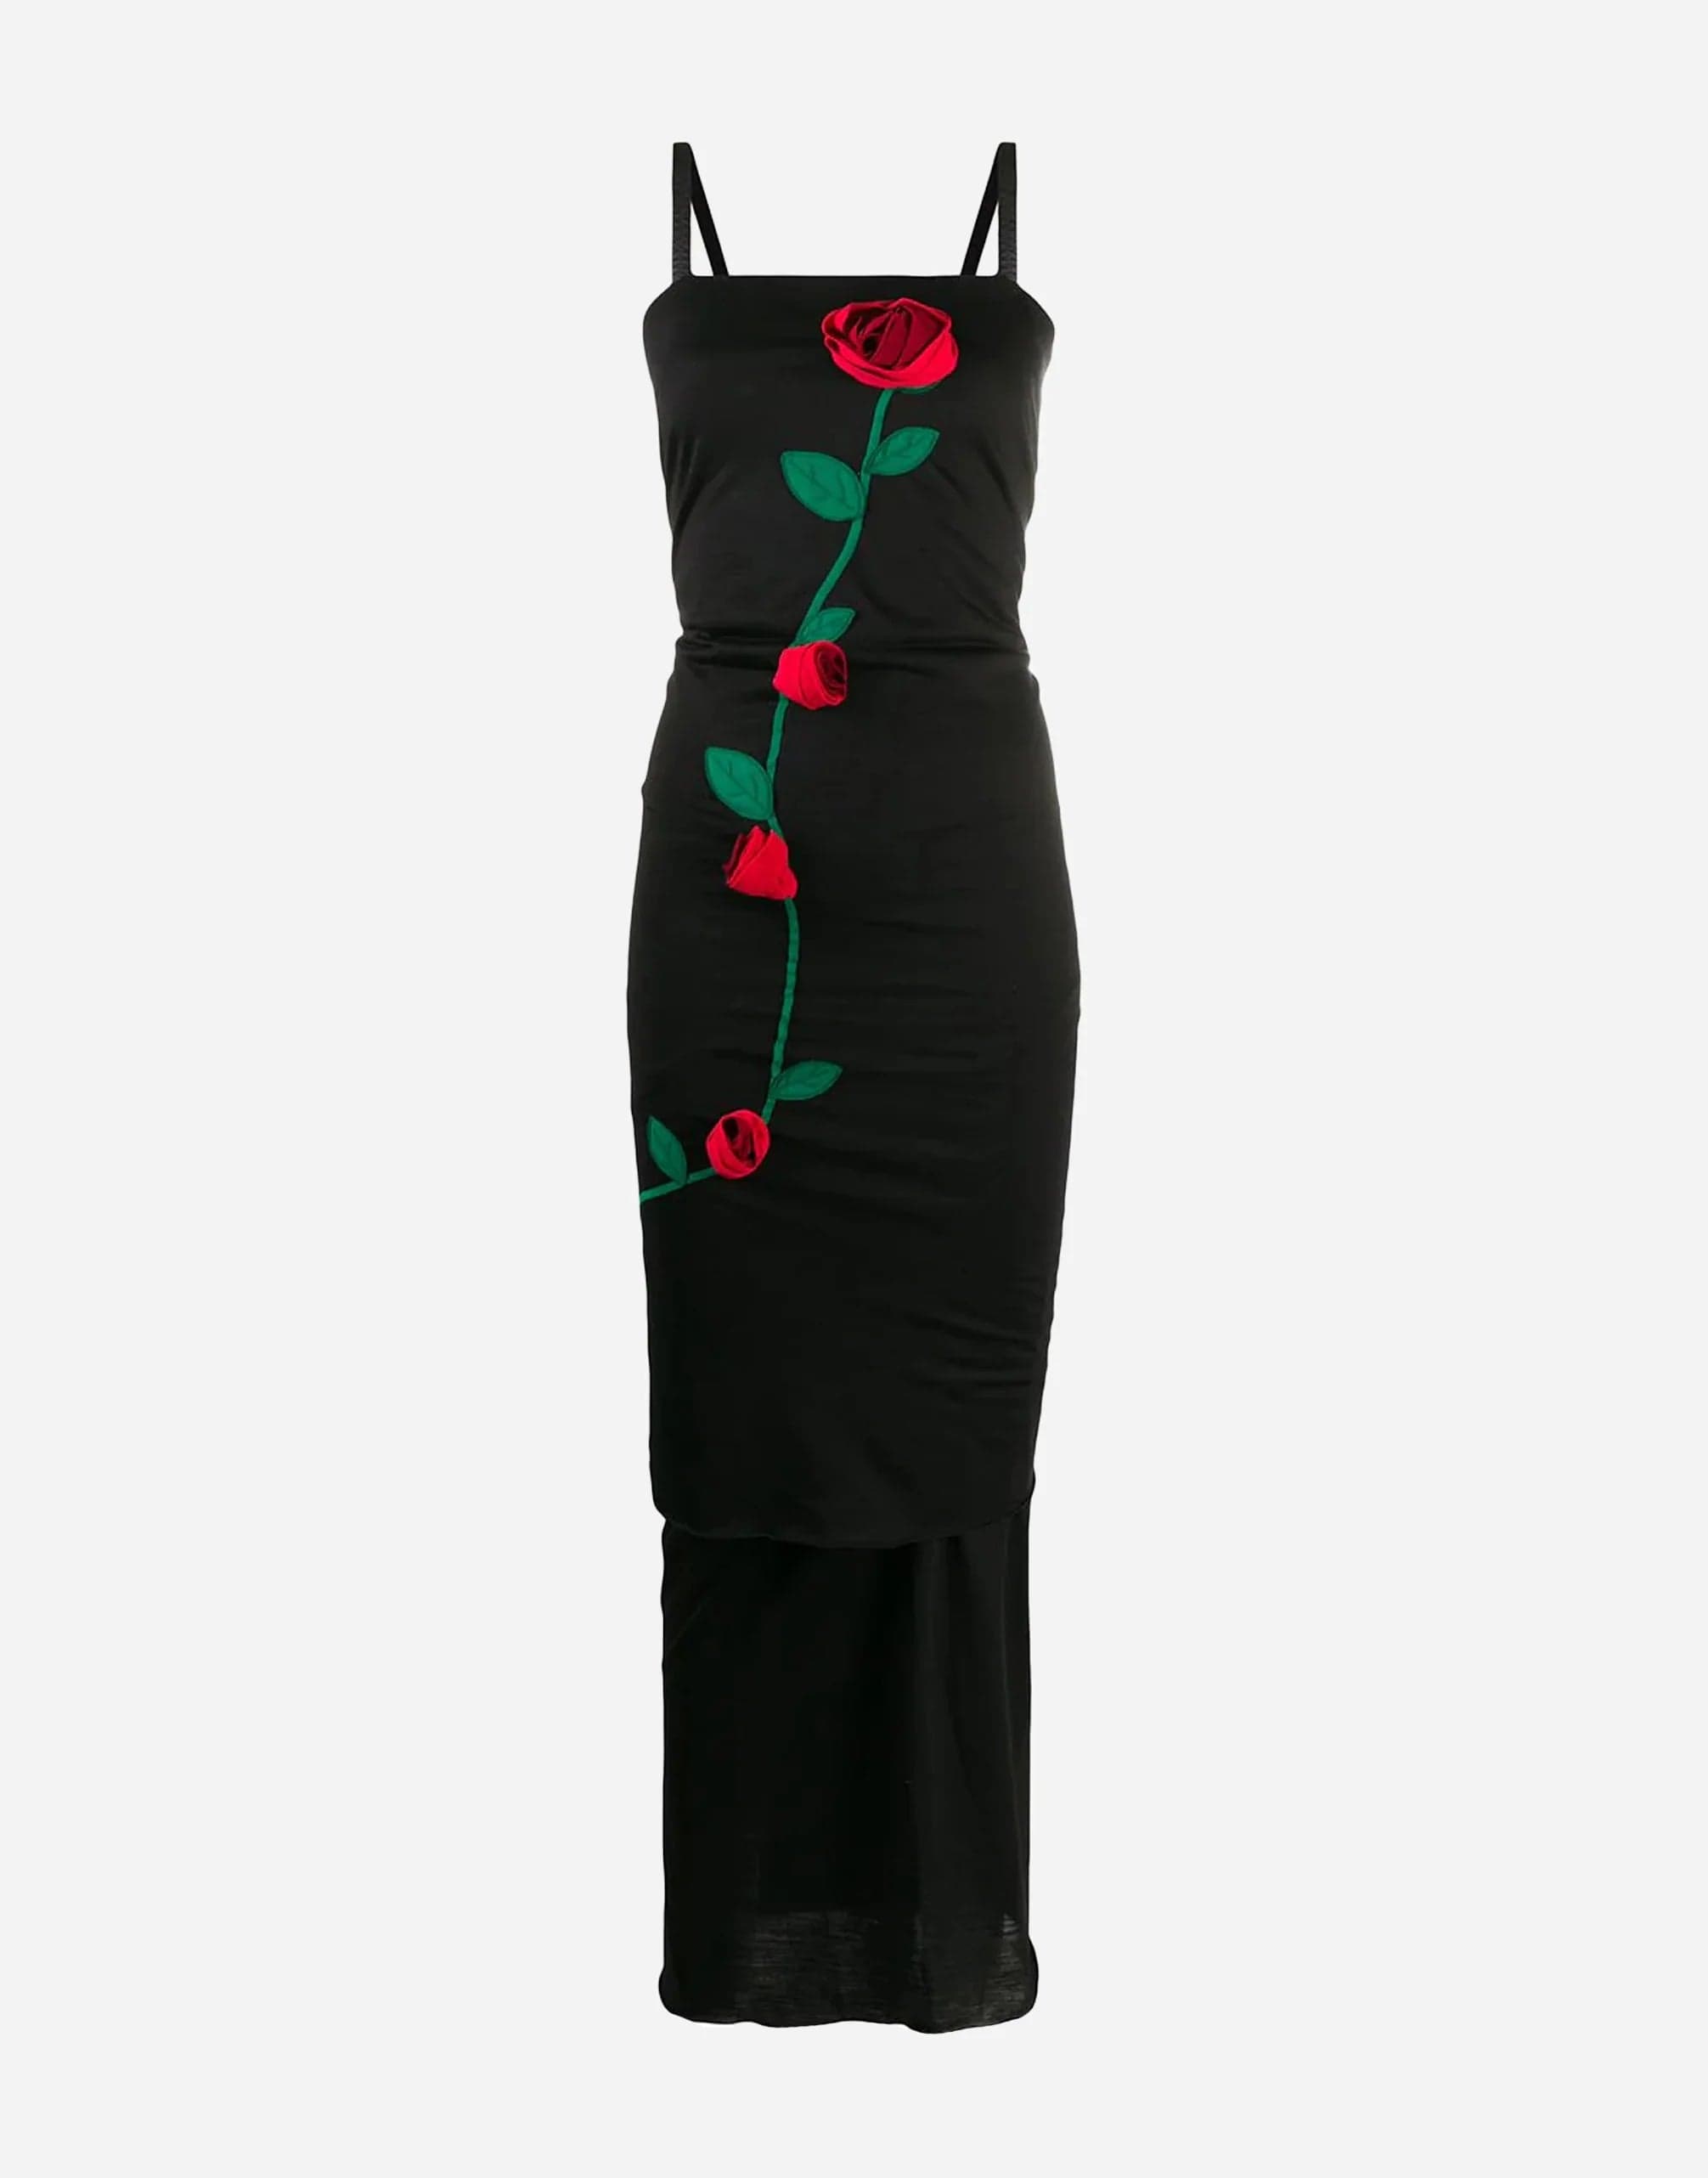 Dolce & Gabbana Rose Applique Fitted Dress